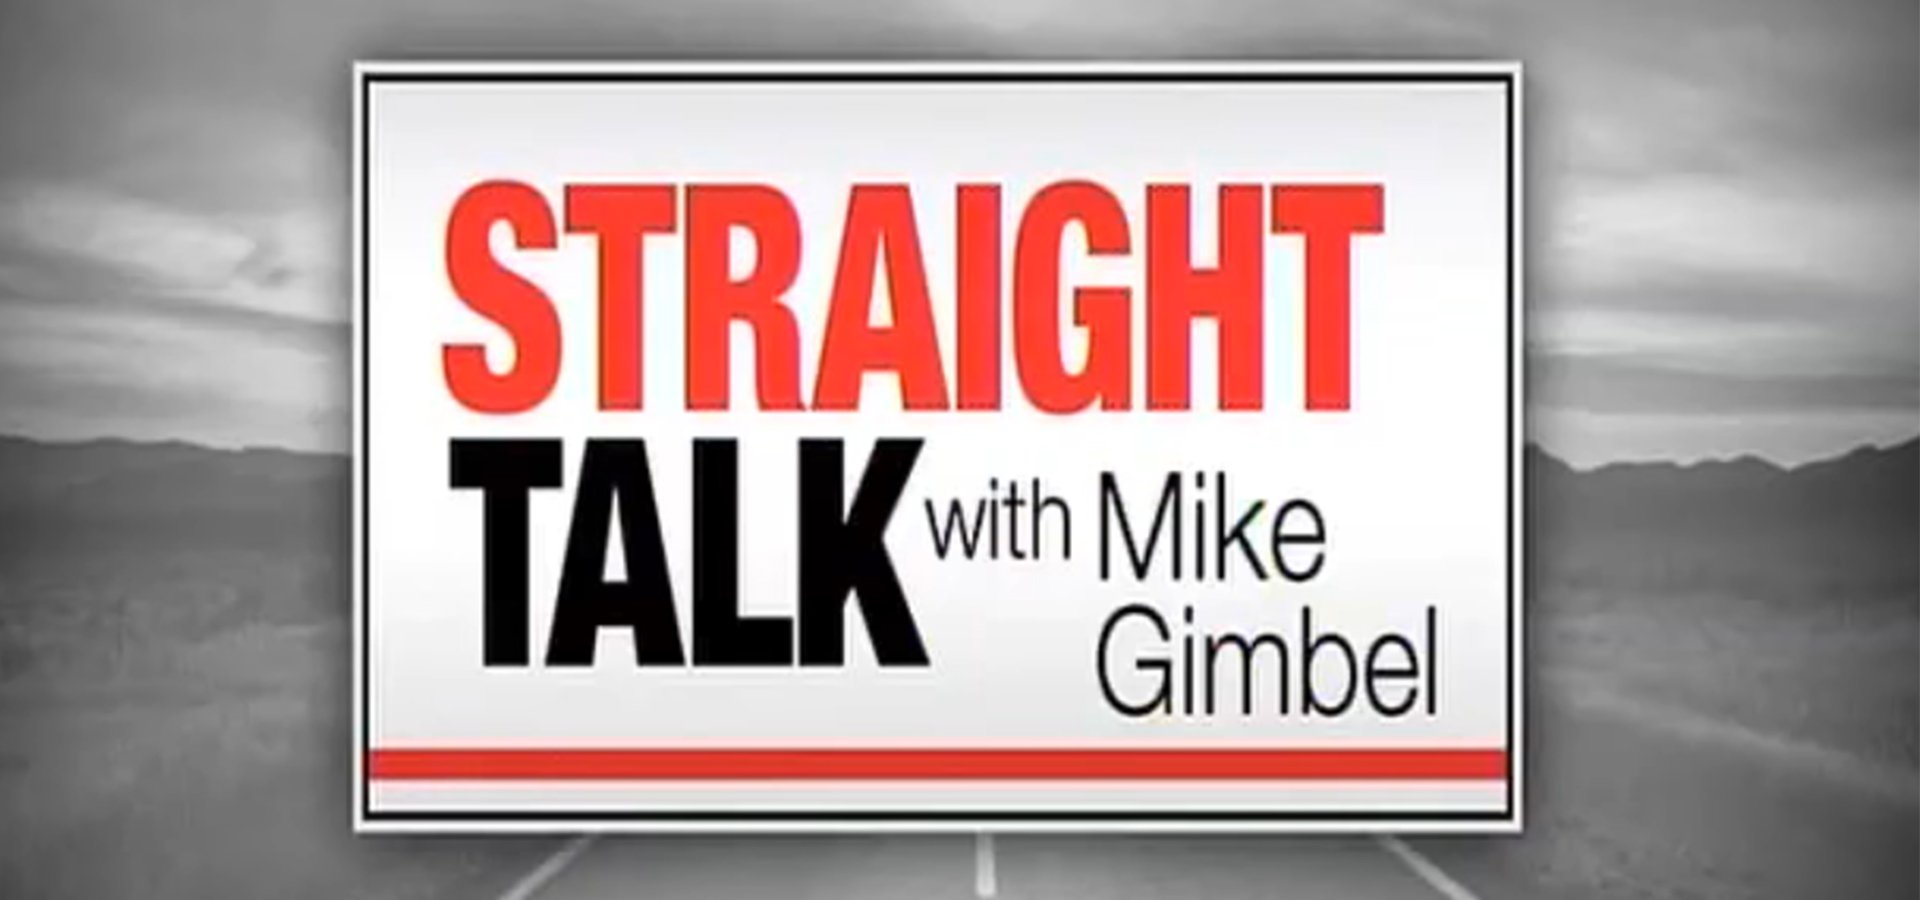 straight talk with mike gimbel logo reminds us about mike gimbel teaming up with amatus health